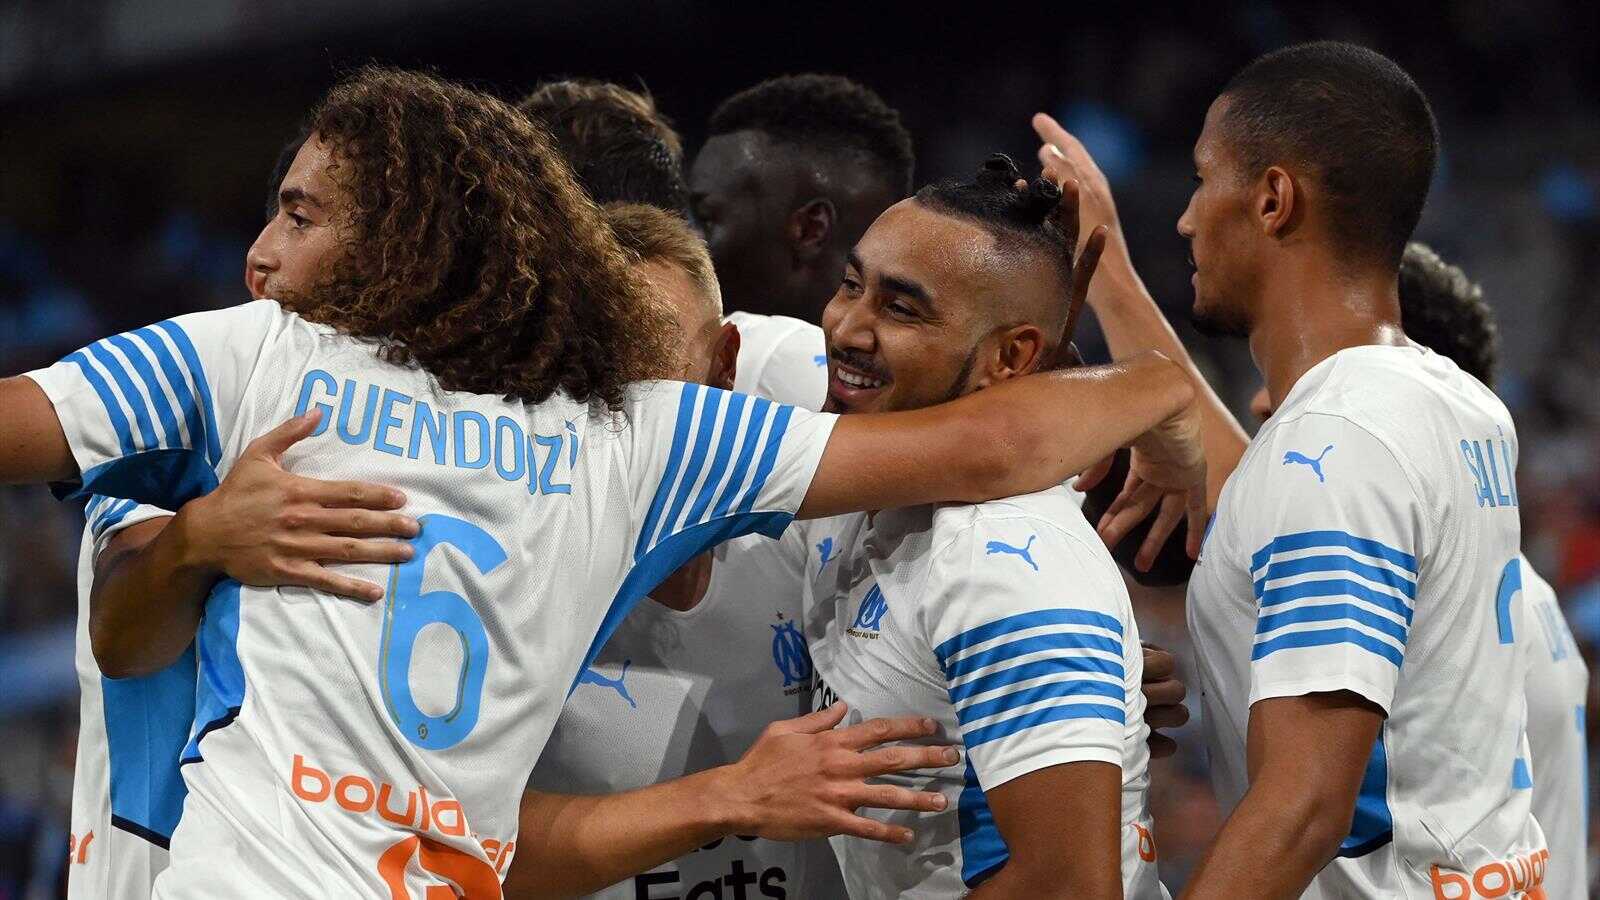 nhan-dinh-soi-keo-marseille-vs-montpellier-3h-ngay-30-1-2022